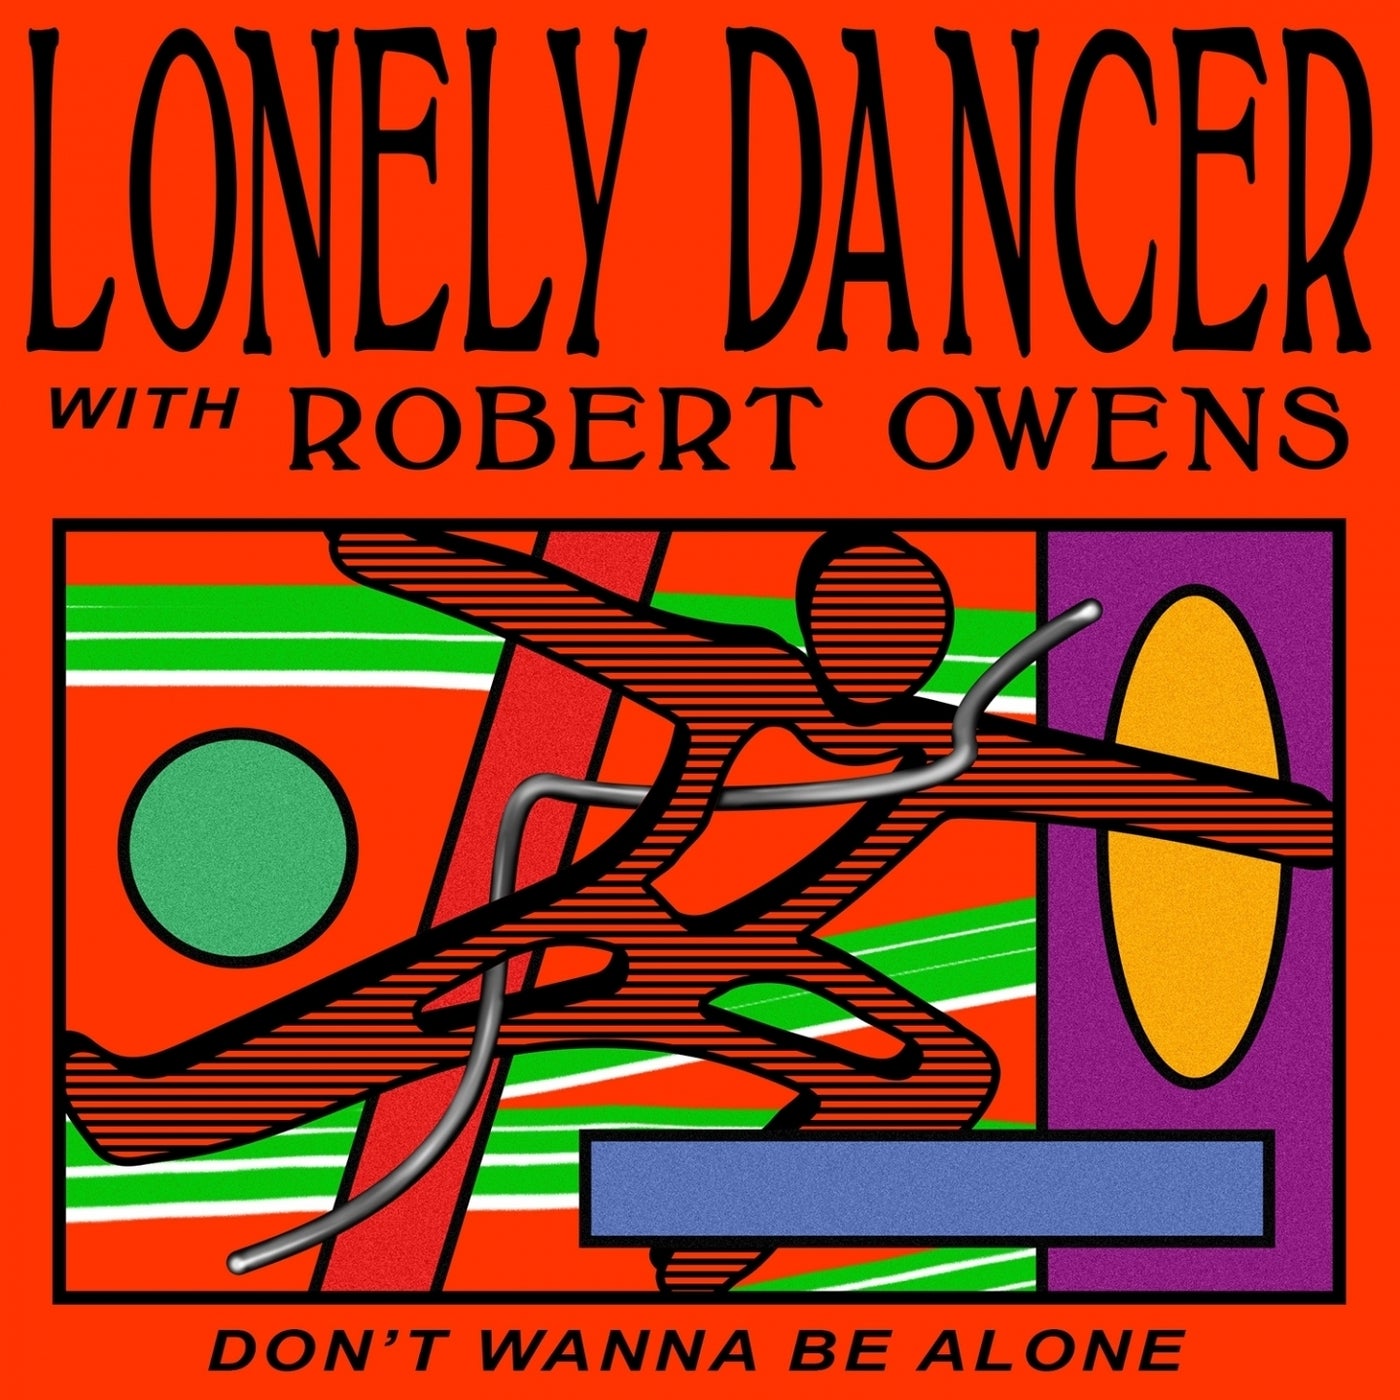 image cover: Robert Owens, Lonely Dancer - Don't Wanna Be Alone / TA0012